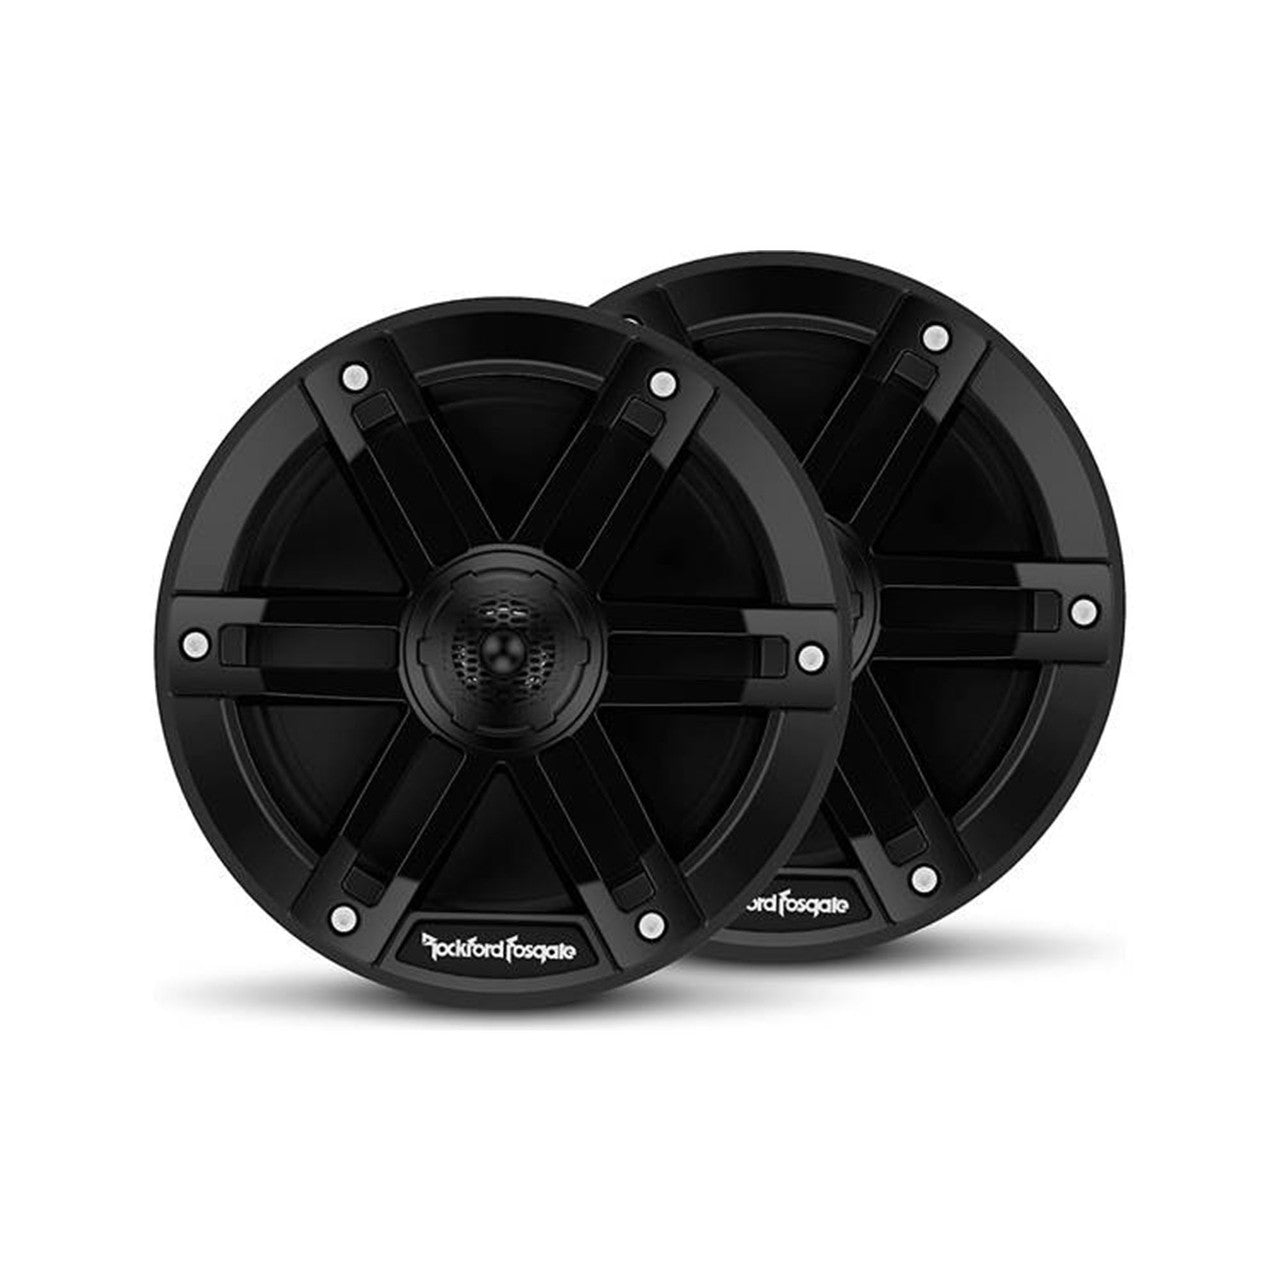 Rockford Fosgate RZR14-STG1 Pmx-1 & Front Speakers Kit Compatible With Select RZR Models